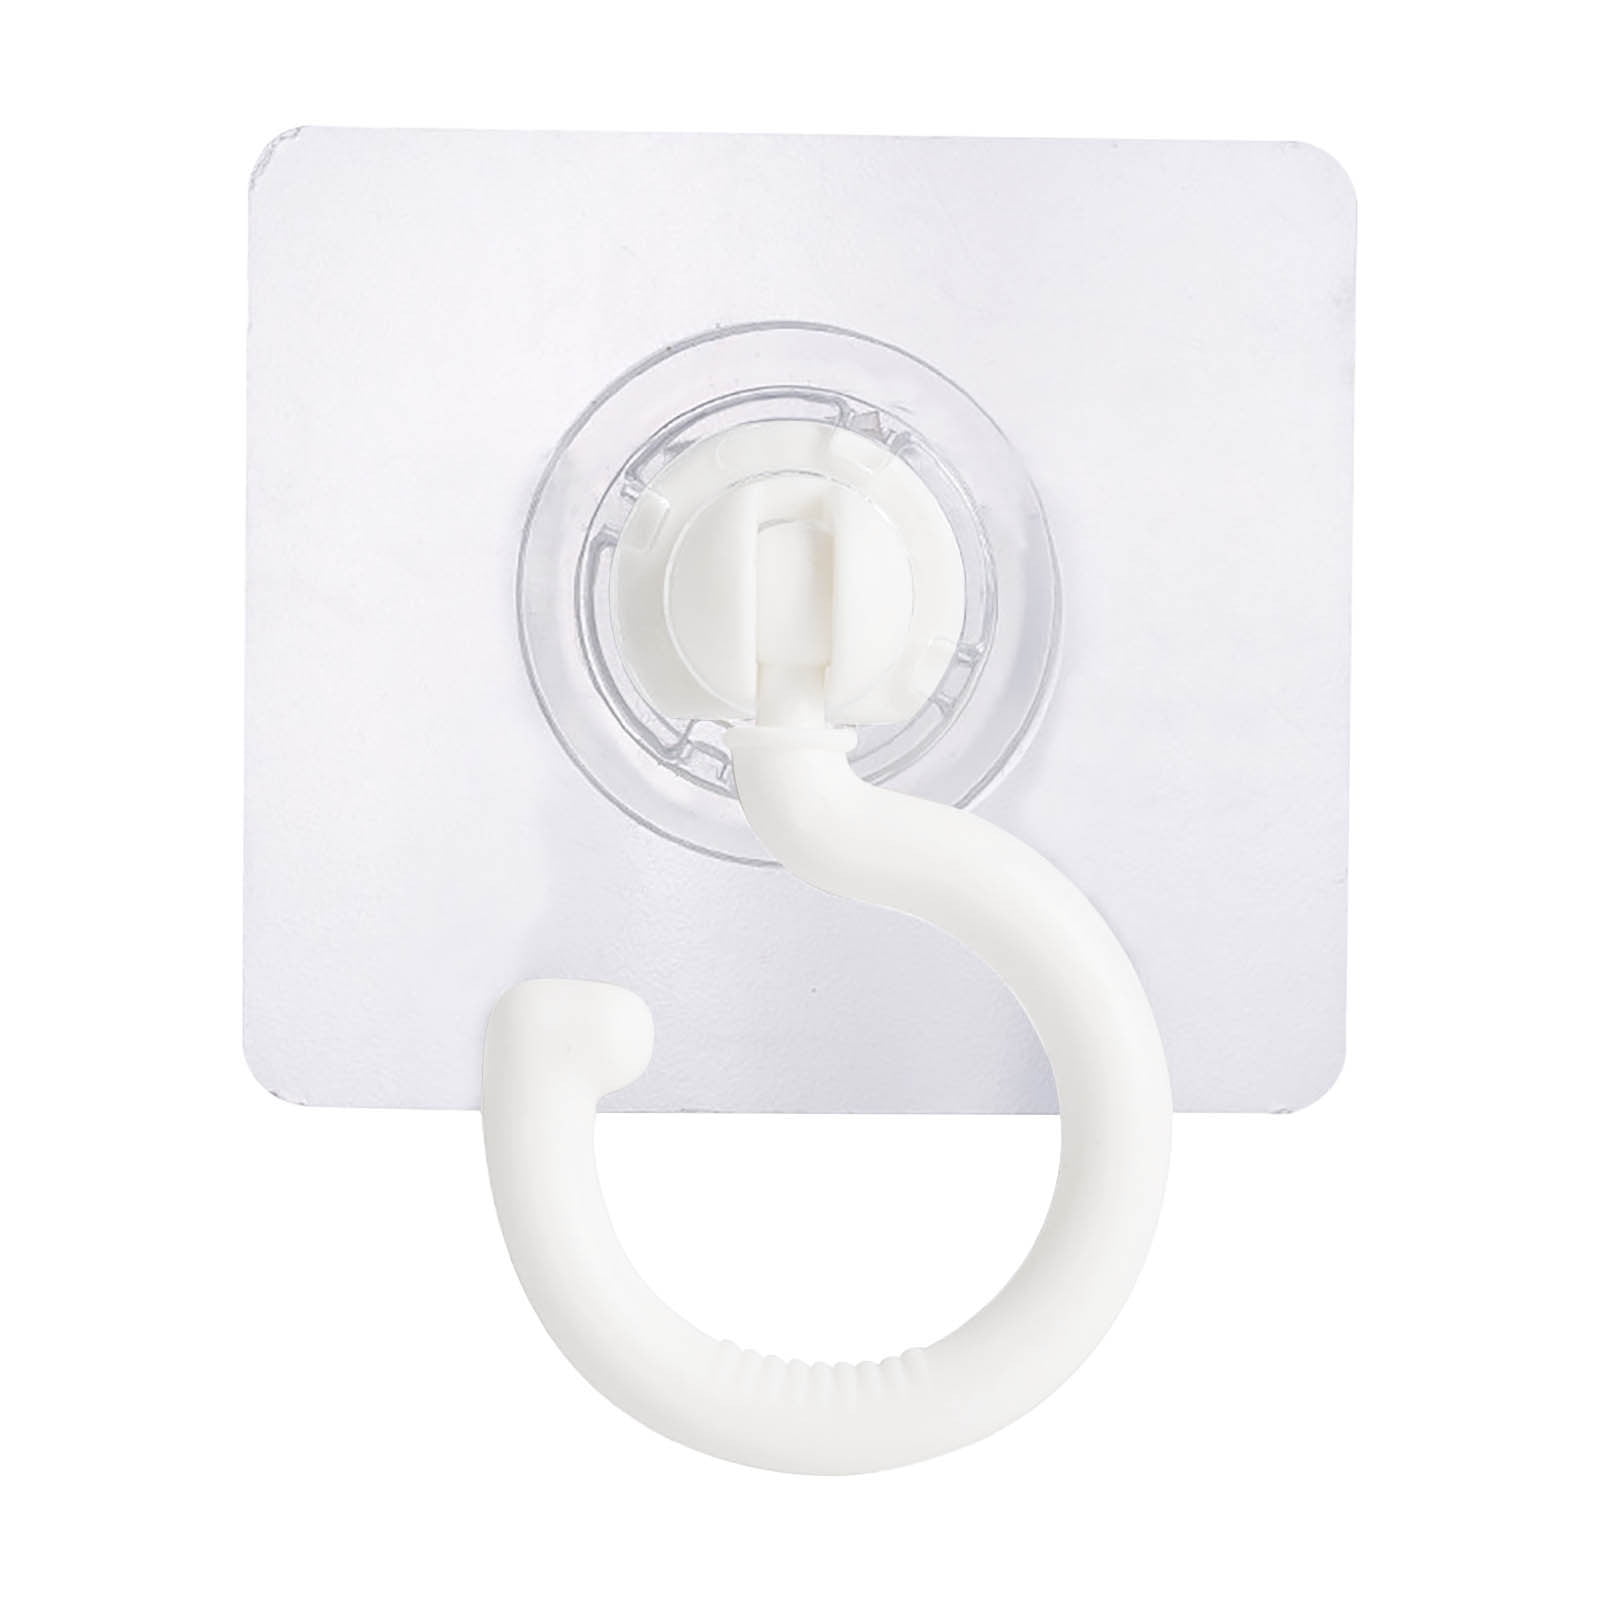 FACTORY OUTLET) (50% OFF!!) Double-sided Adhesive Wall Hooks – The